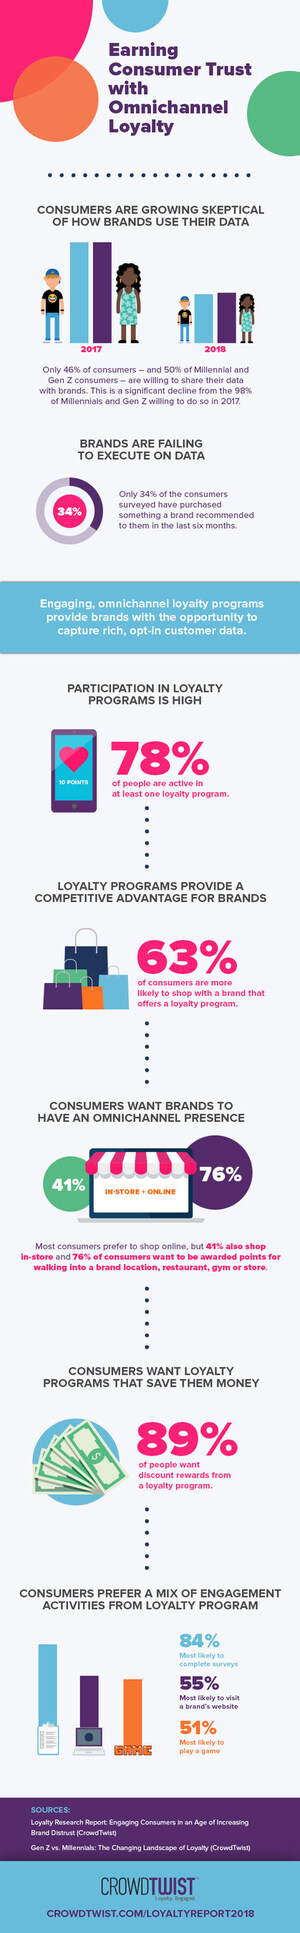 CrowdTwist Consumer Loyalty Study Finds Growing Distrust of Brands, Yet Strong Loyalty Program Engagement